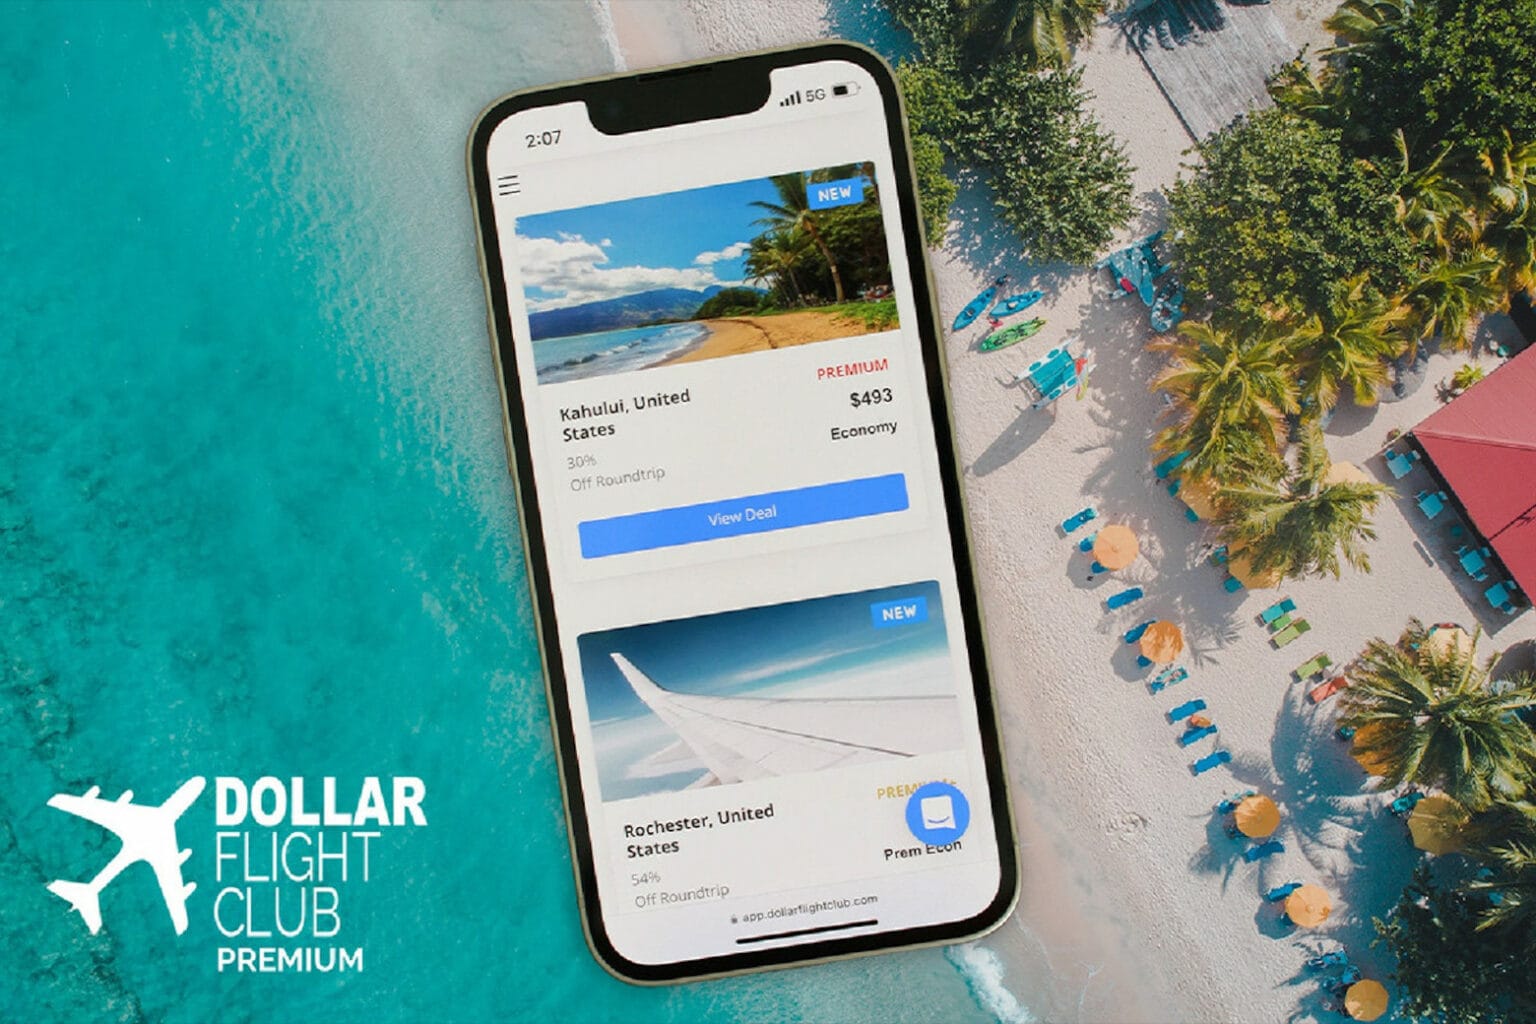 Grab huge savings on your summer vacations with a Dollar Flight Club lifetime subscription, less than $50 today.